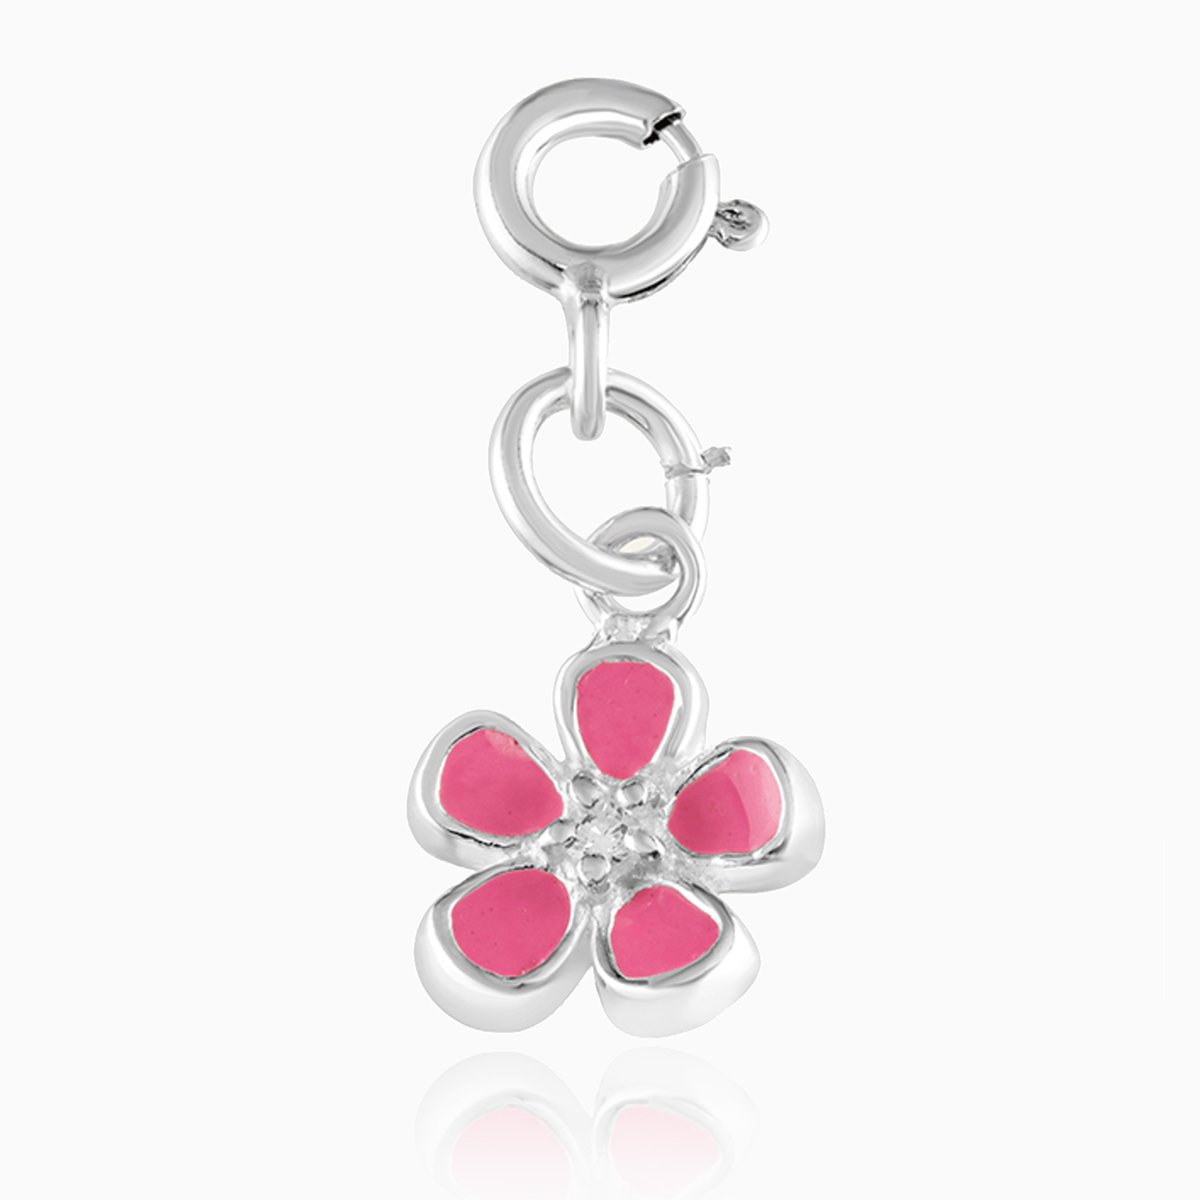 Product title: Pink Flower Silver Charm, product type: Charm